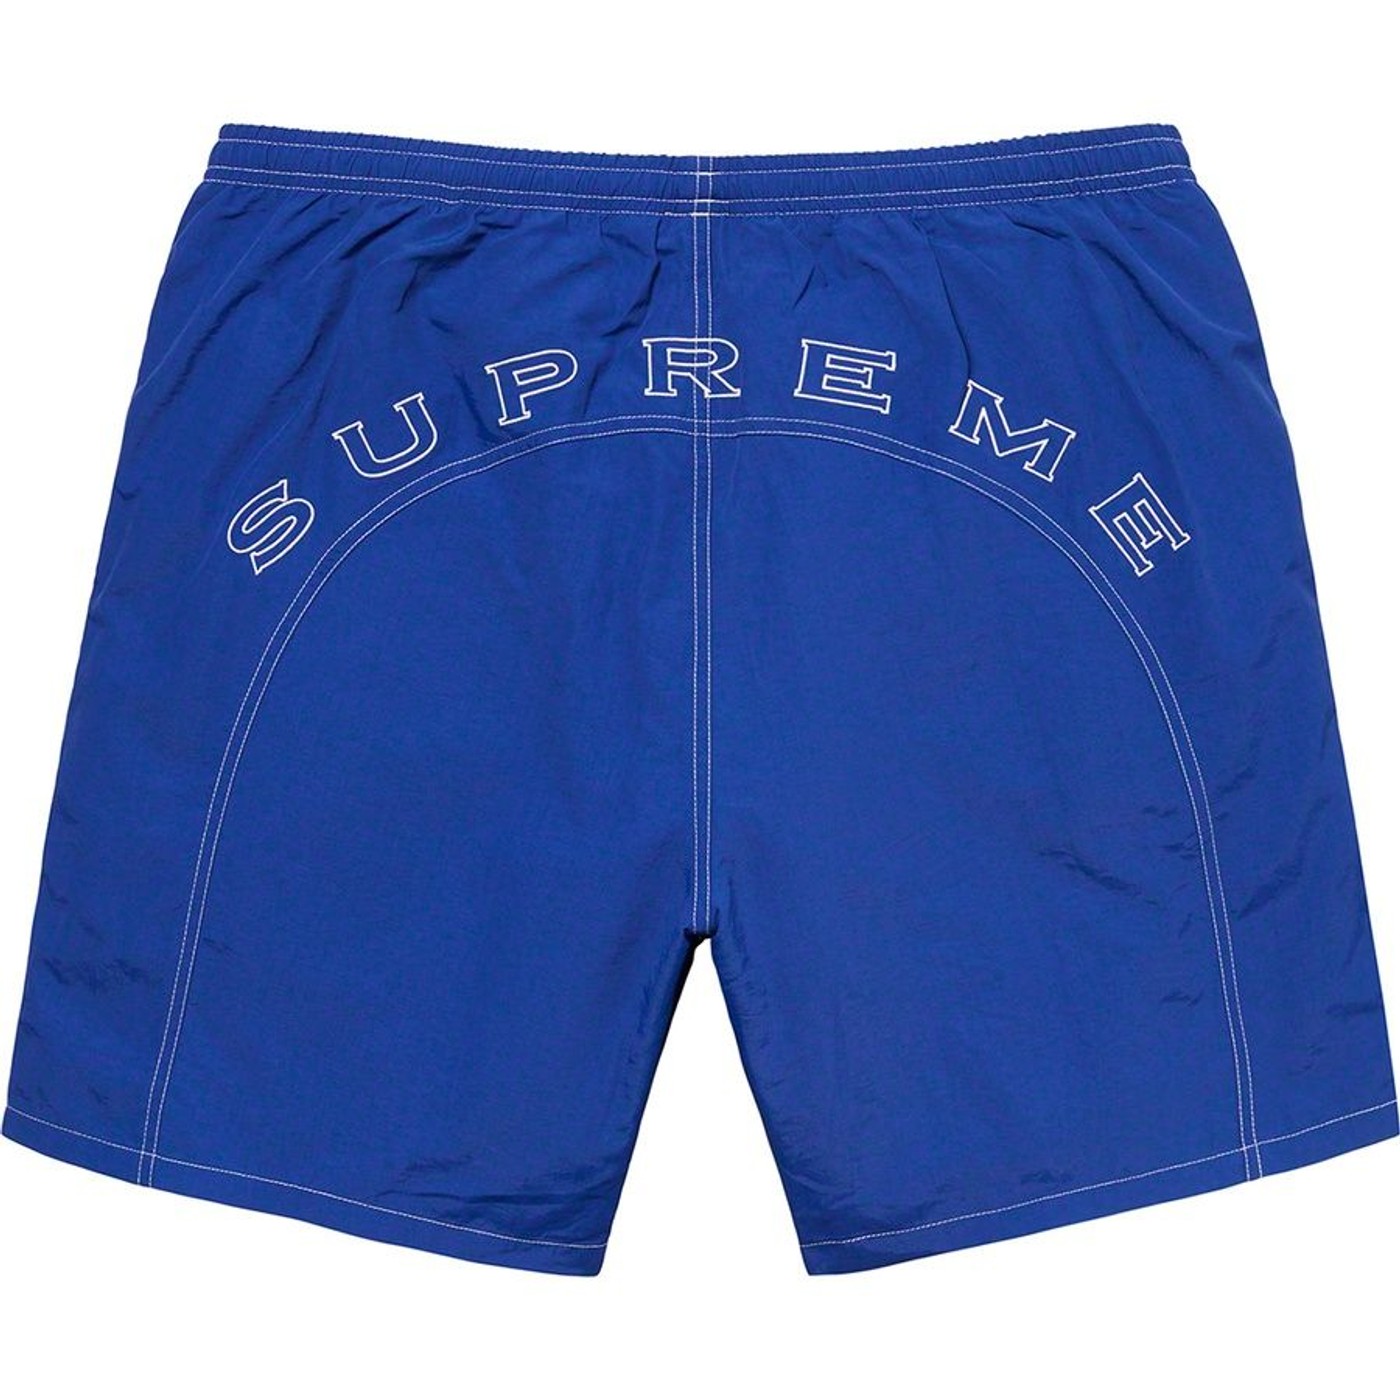 Racing Water Short - Spring/Summer 2020 Preview – Supreme